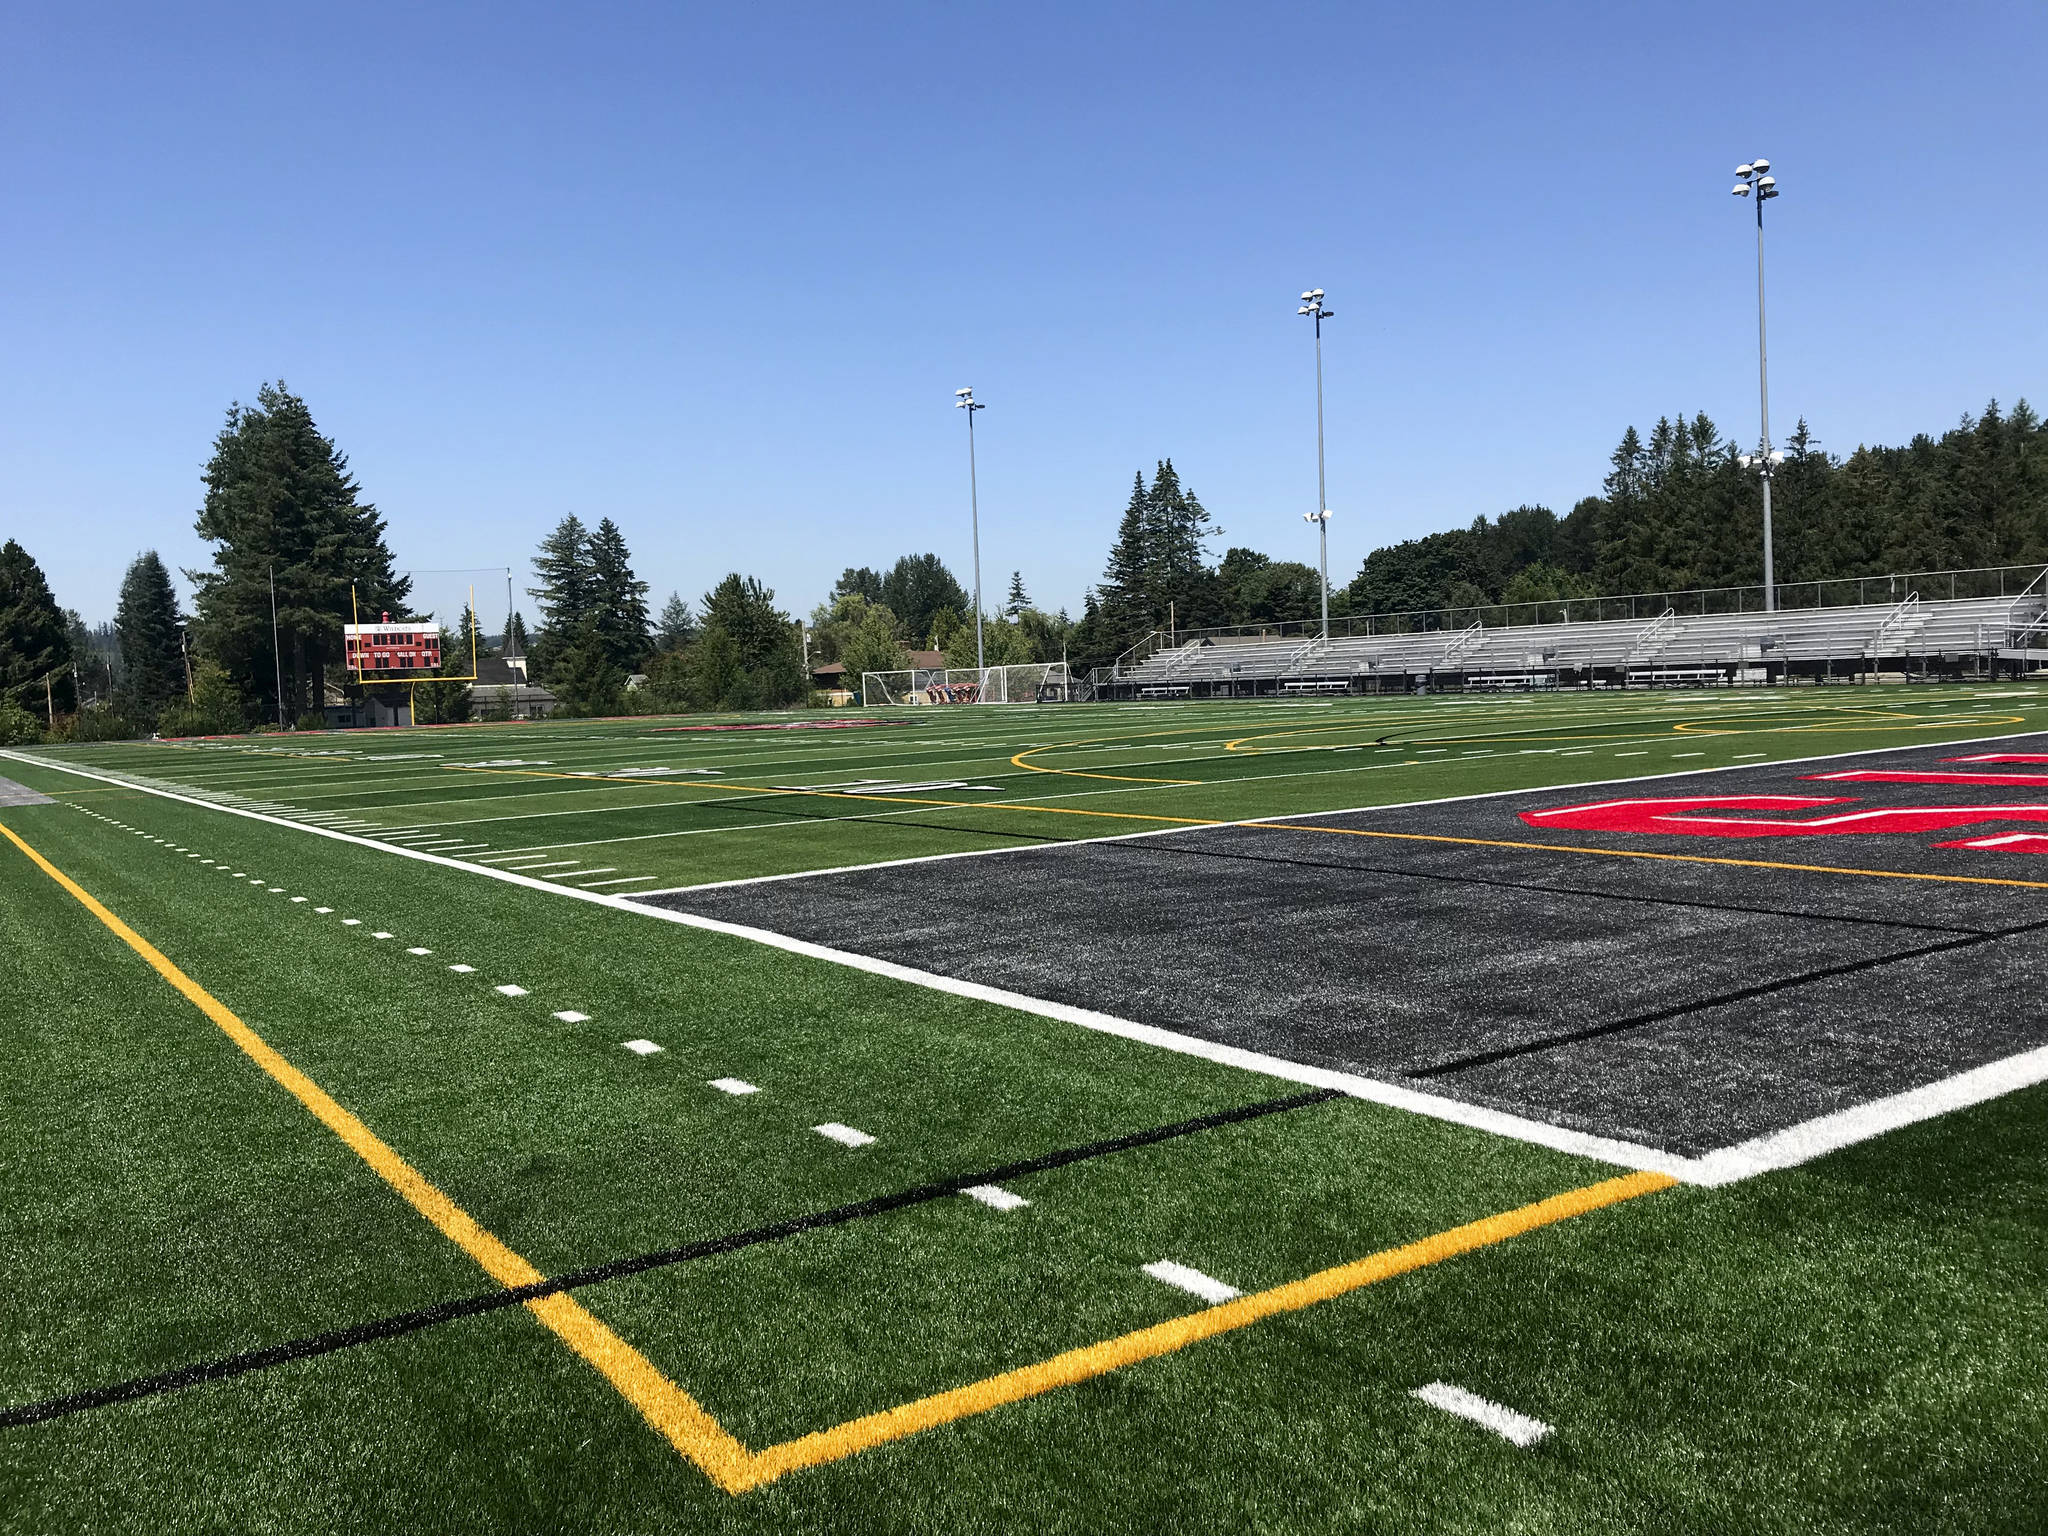 Football coaches butt heads: Mount Si and Mount Vernon coaches display unsportsmanlike behaviors